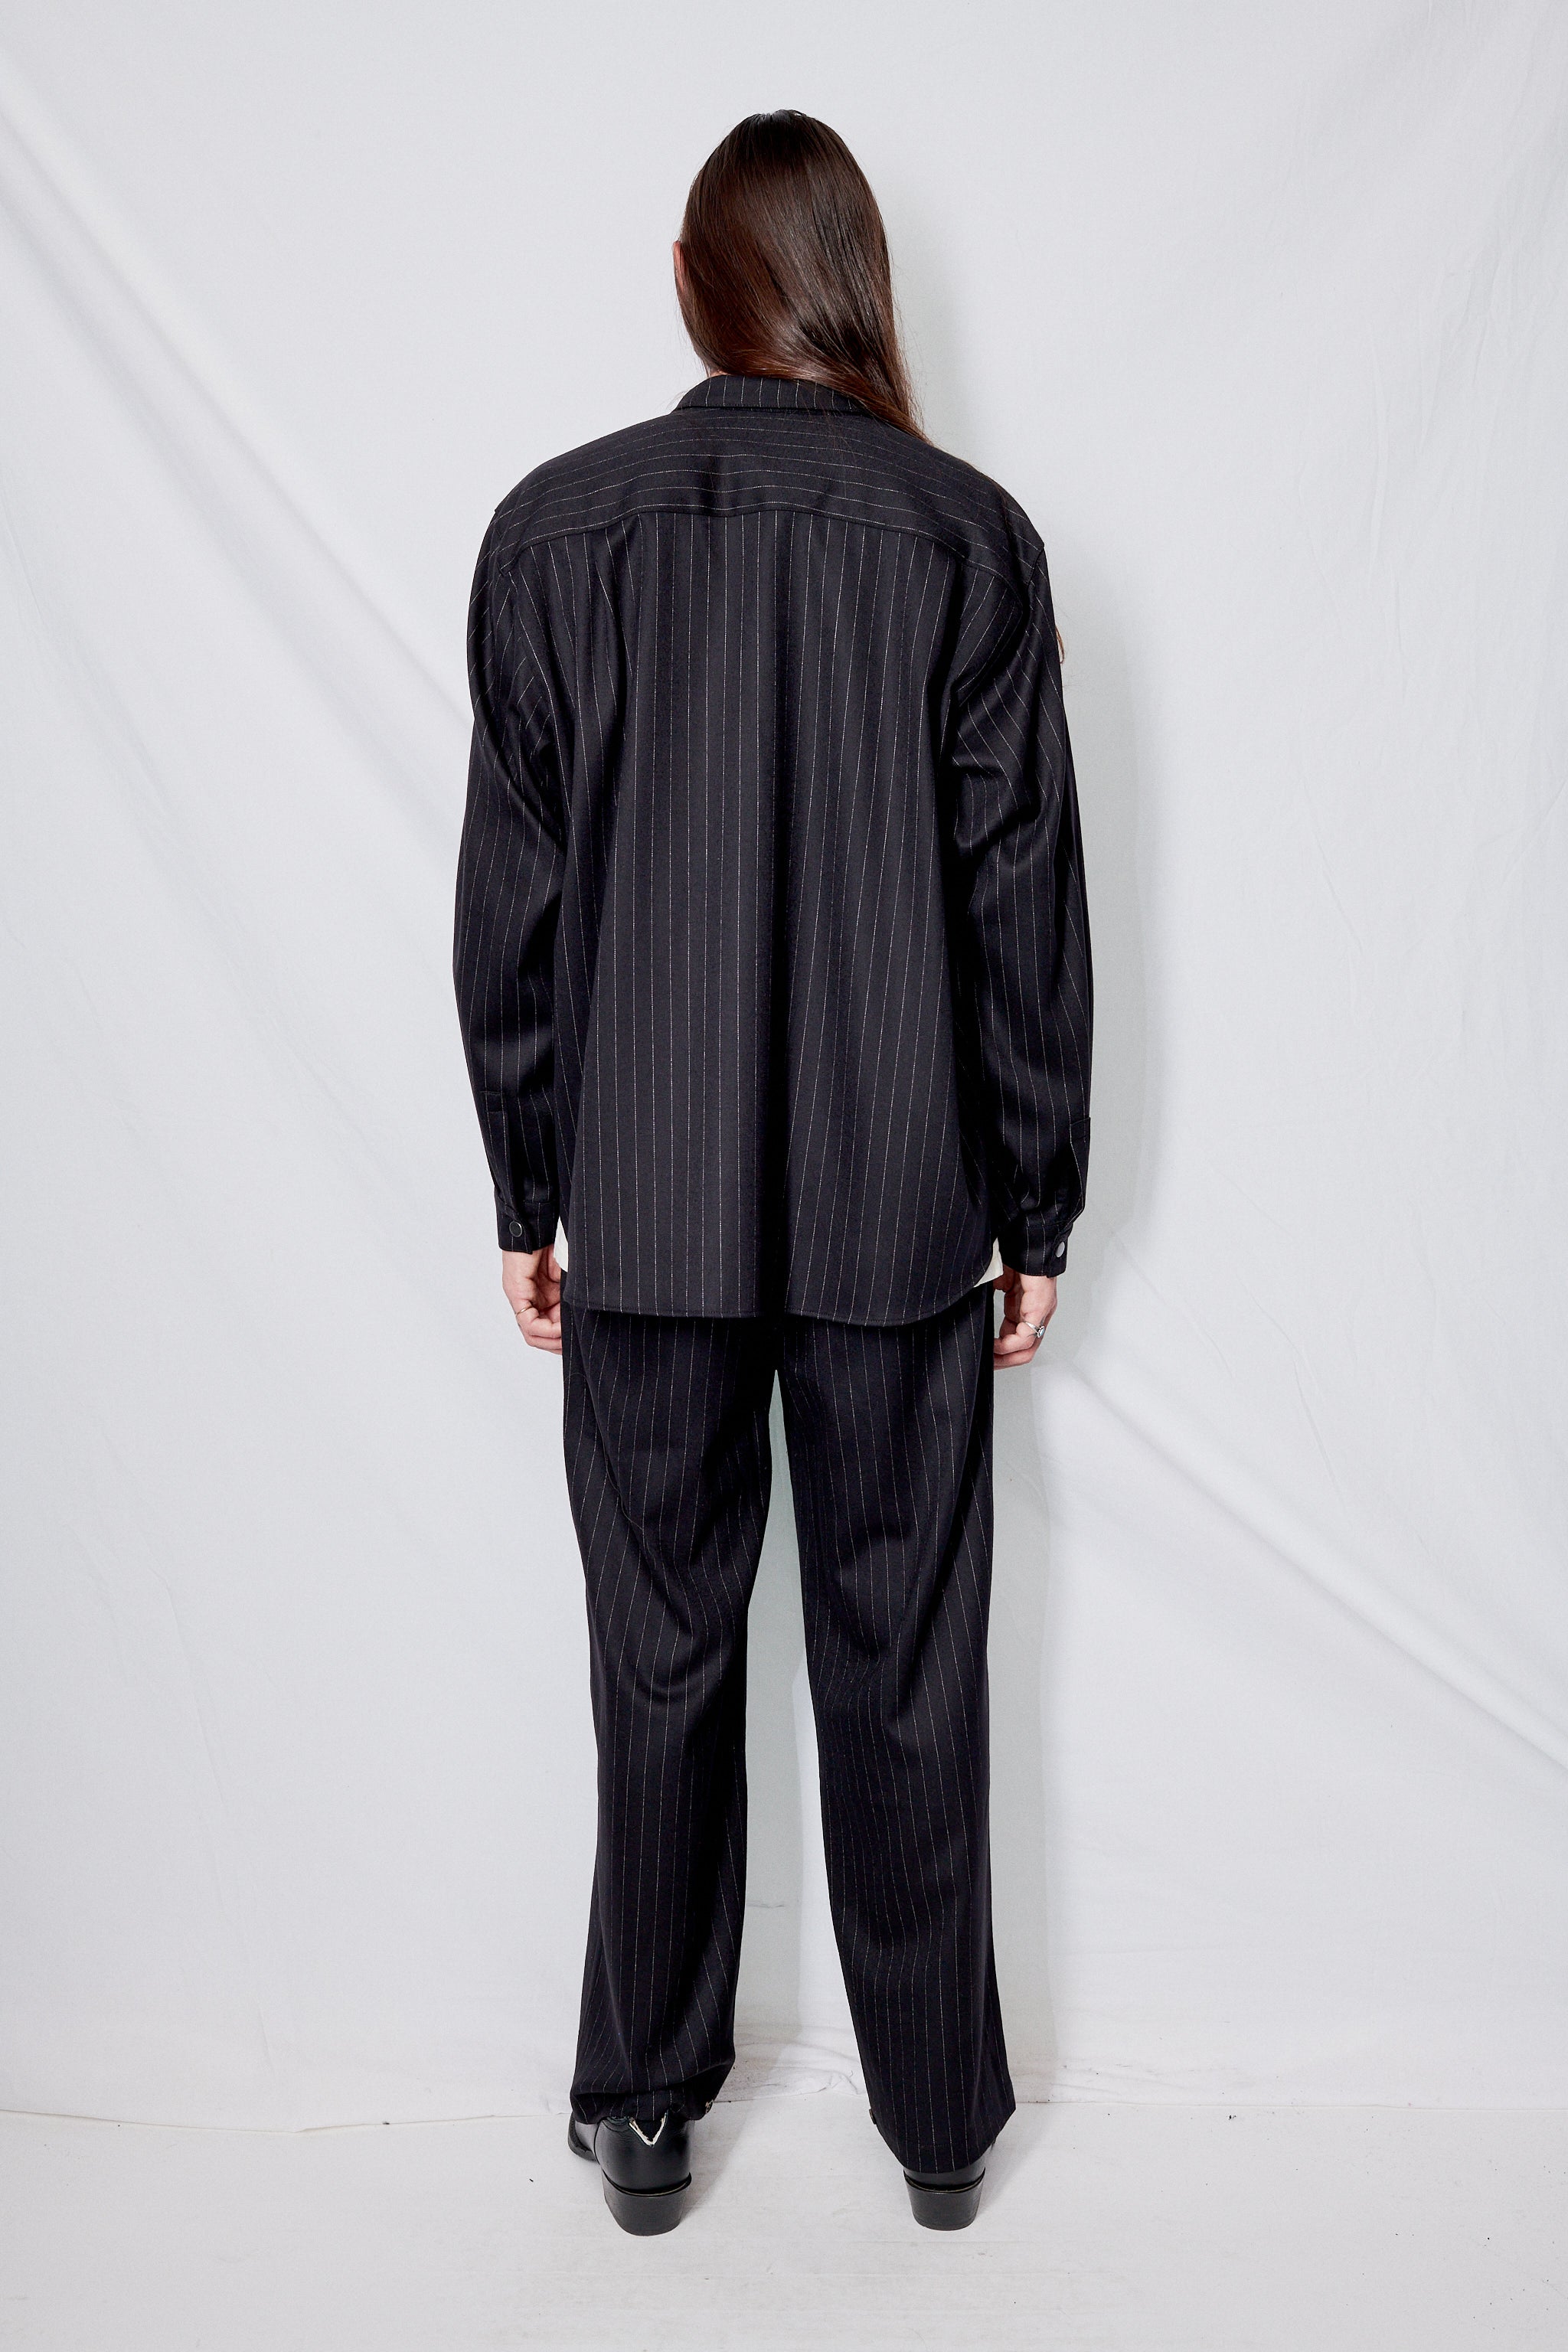 Navy Stripe Suiting Full Pant